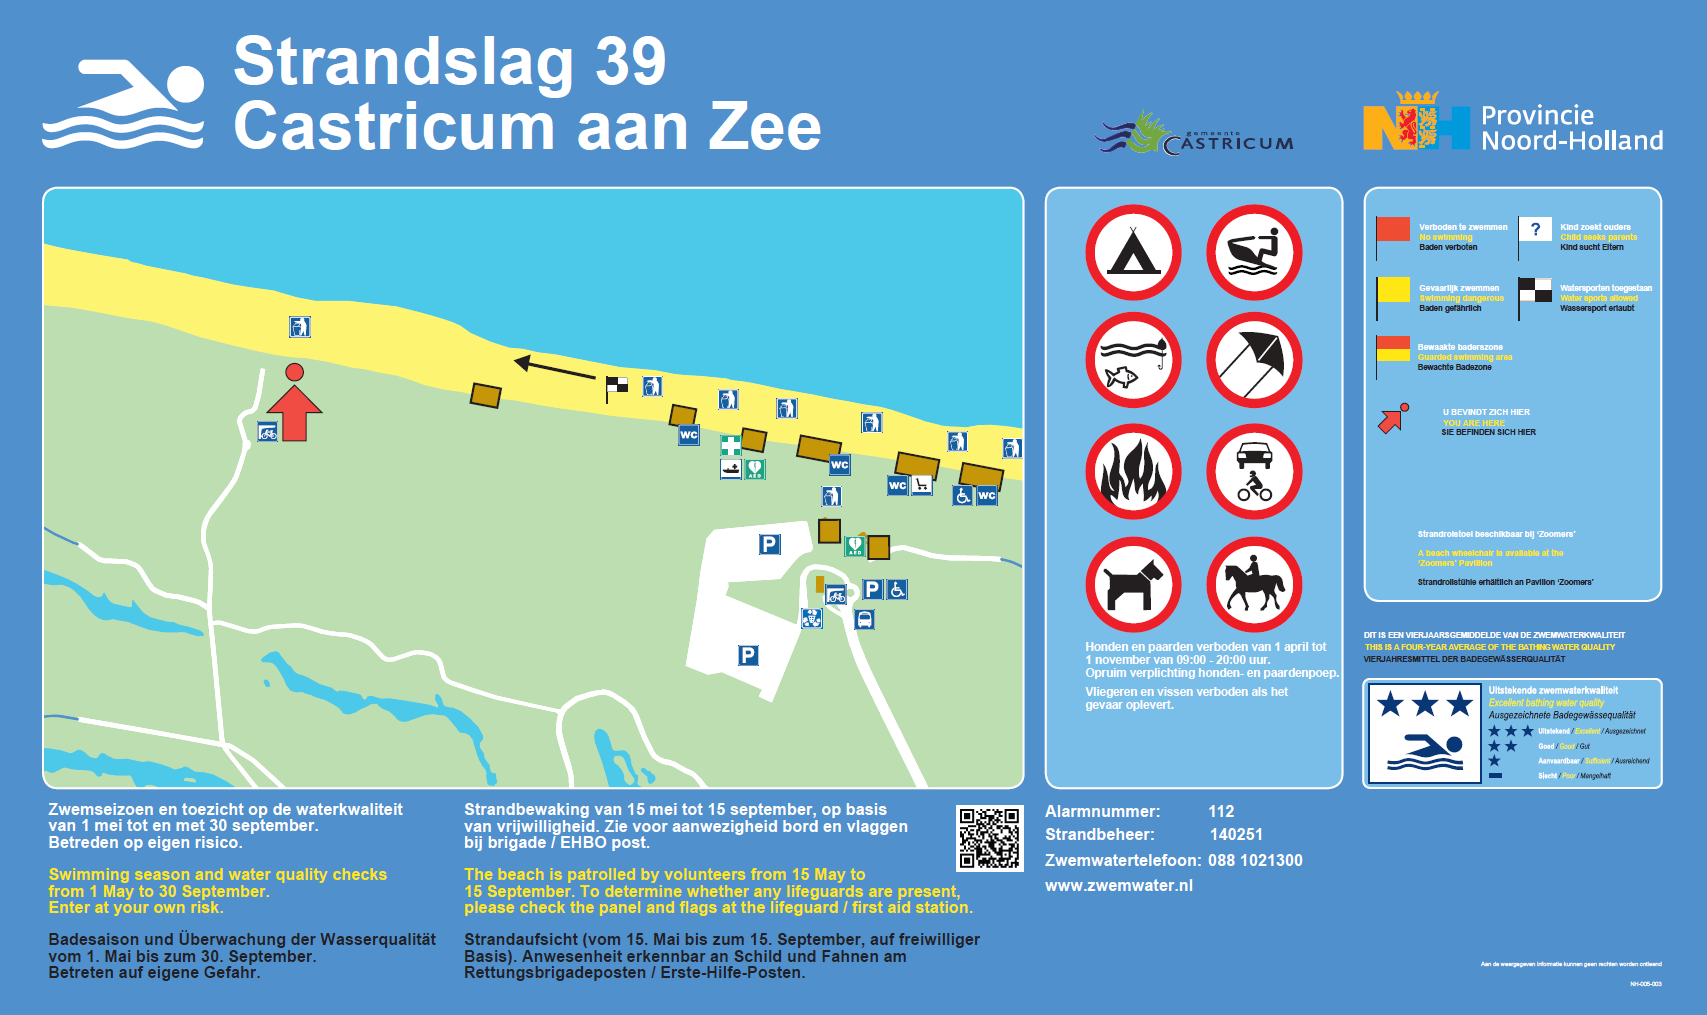 The information board at the swimming location Castricum aan Zee, Stille Strand, Strandslag 39